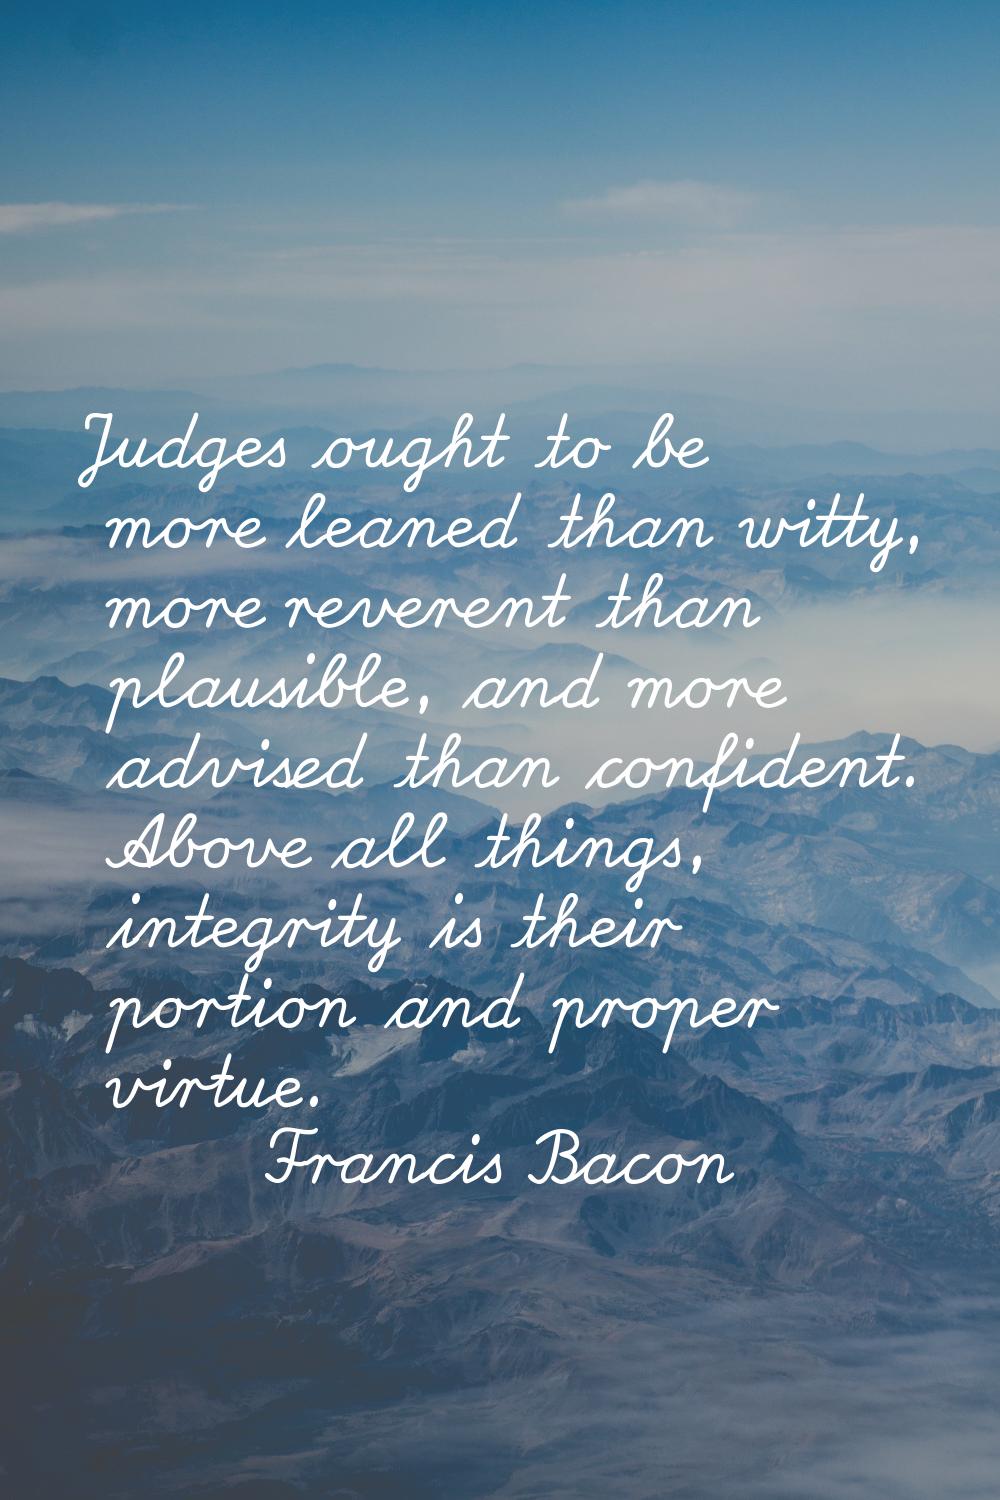 Judges ought to be more leaned than witty, more reverent than plausible, and more advised than conf